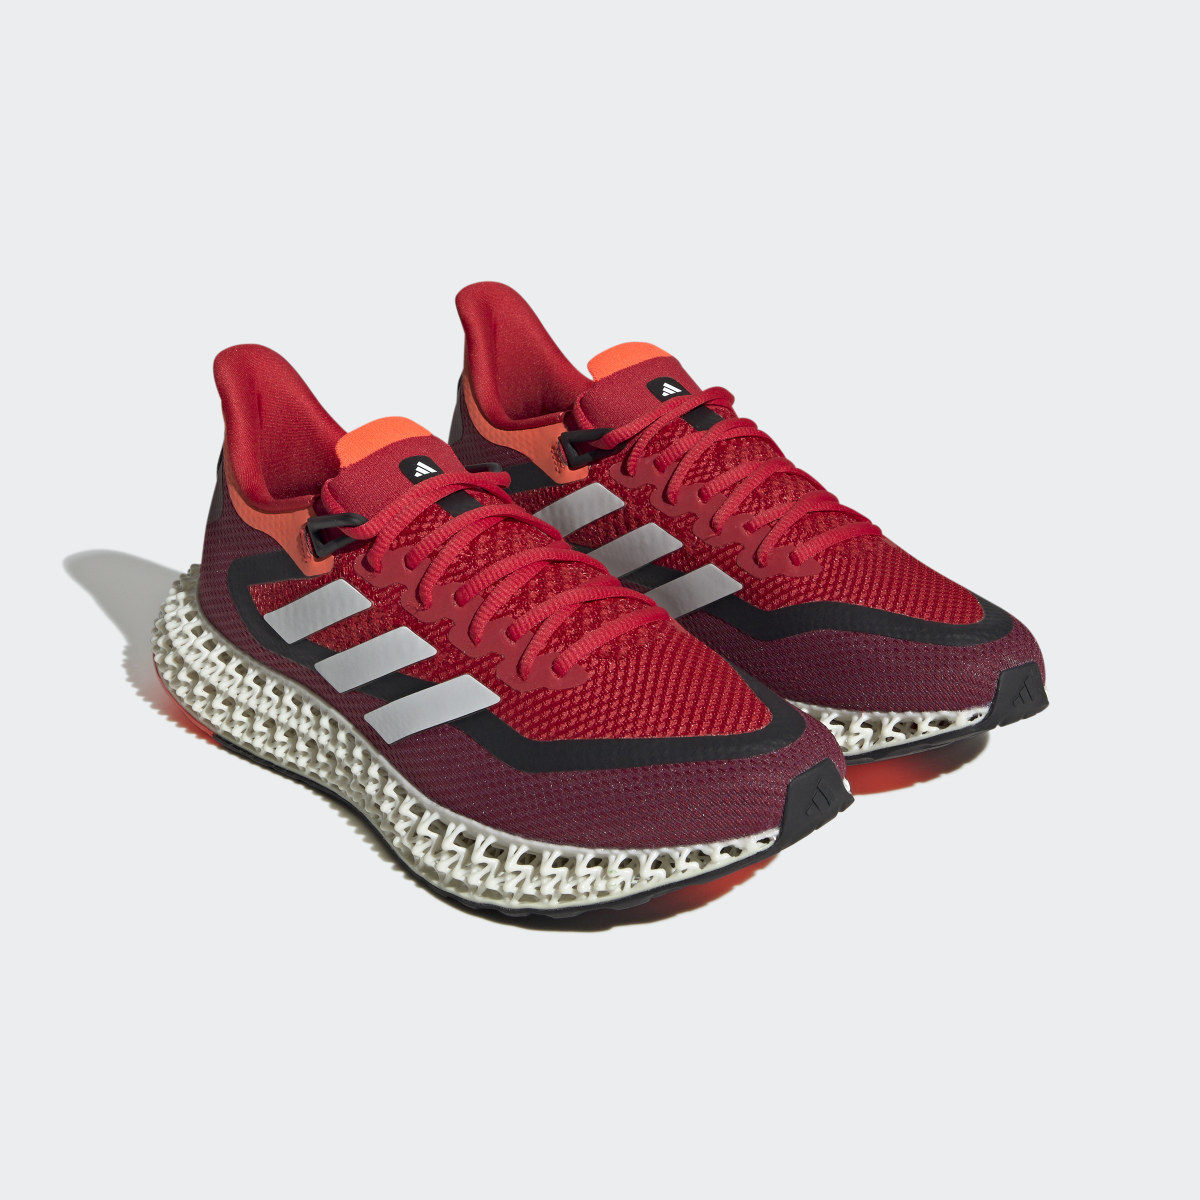 Adidas 4DFWD 2 Running Shoes. 11